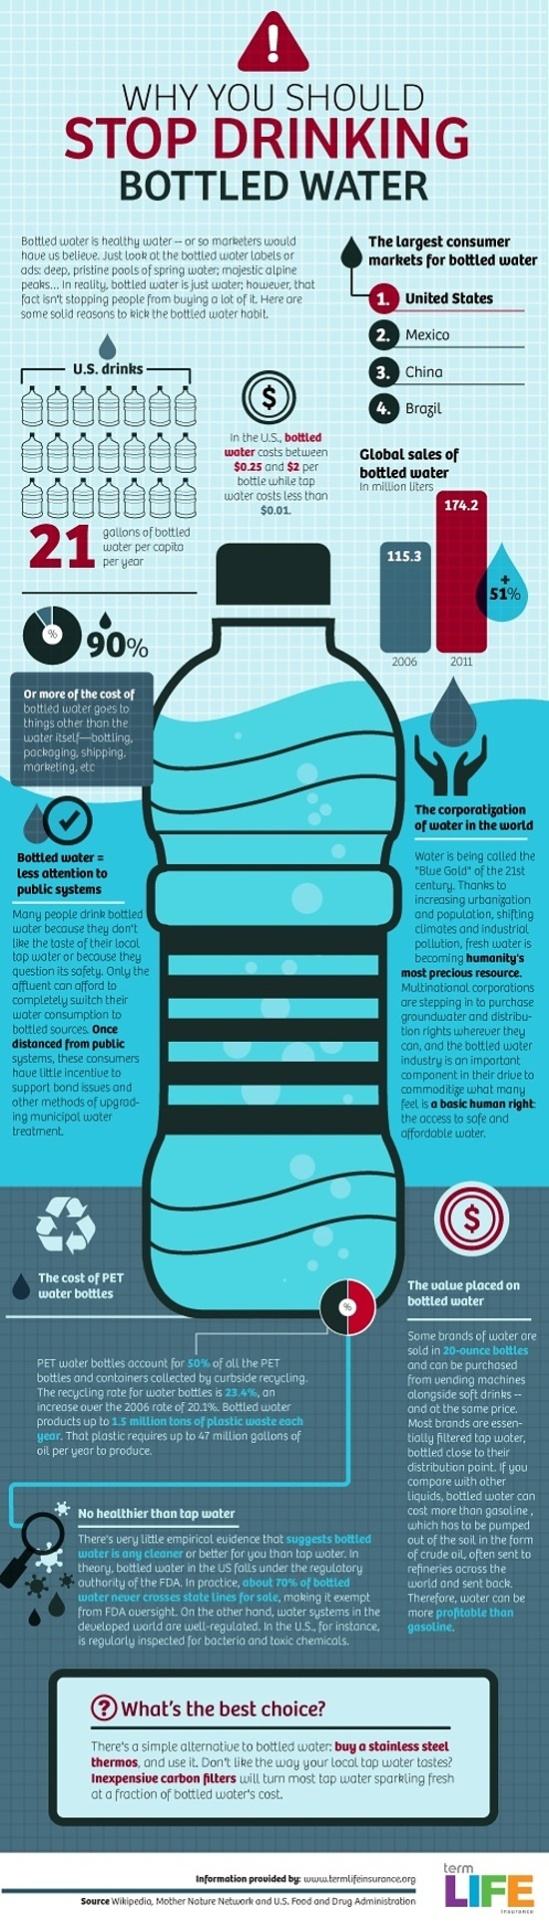 Obrázek Stop drinking bottled water - the facts 29-12-2011